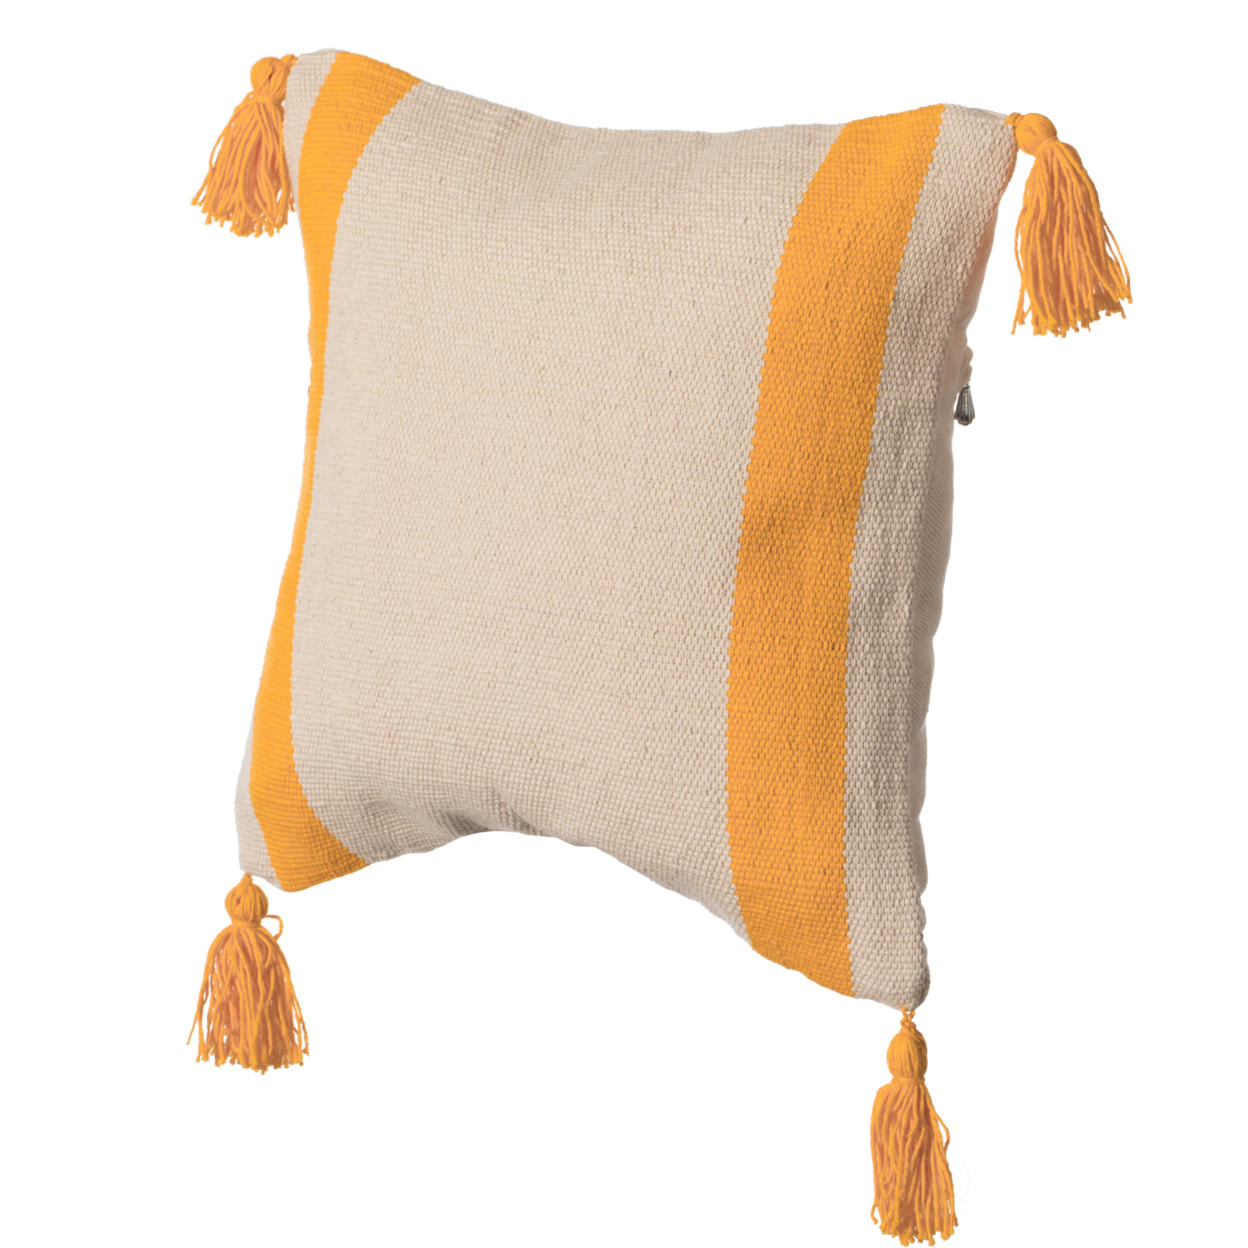 16 Handwoven Cotton Throw Pillow Cover With Side Stripes - Yellow With Cushion